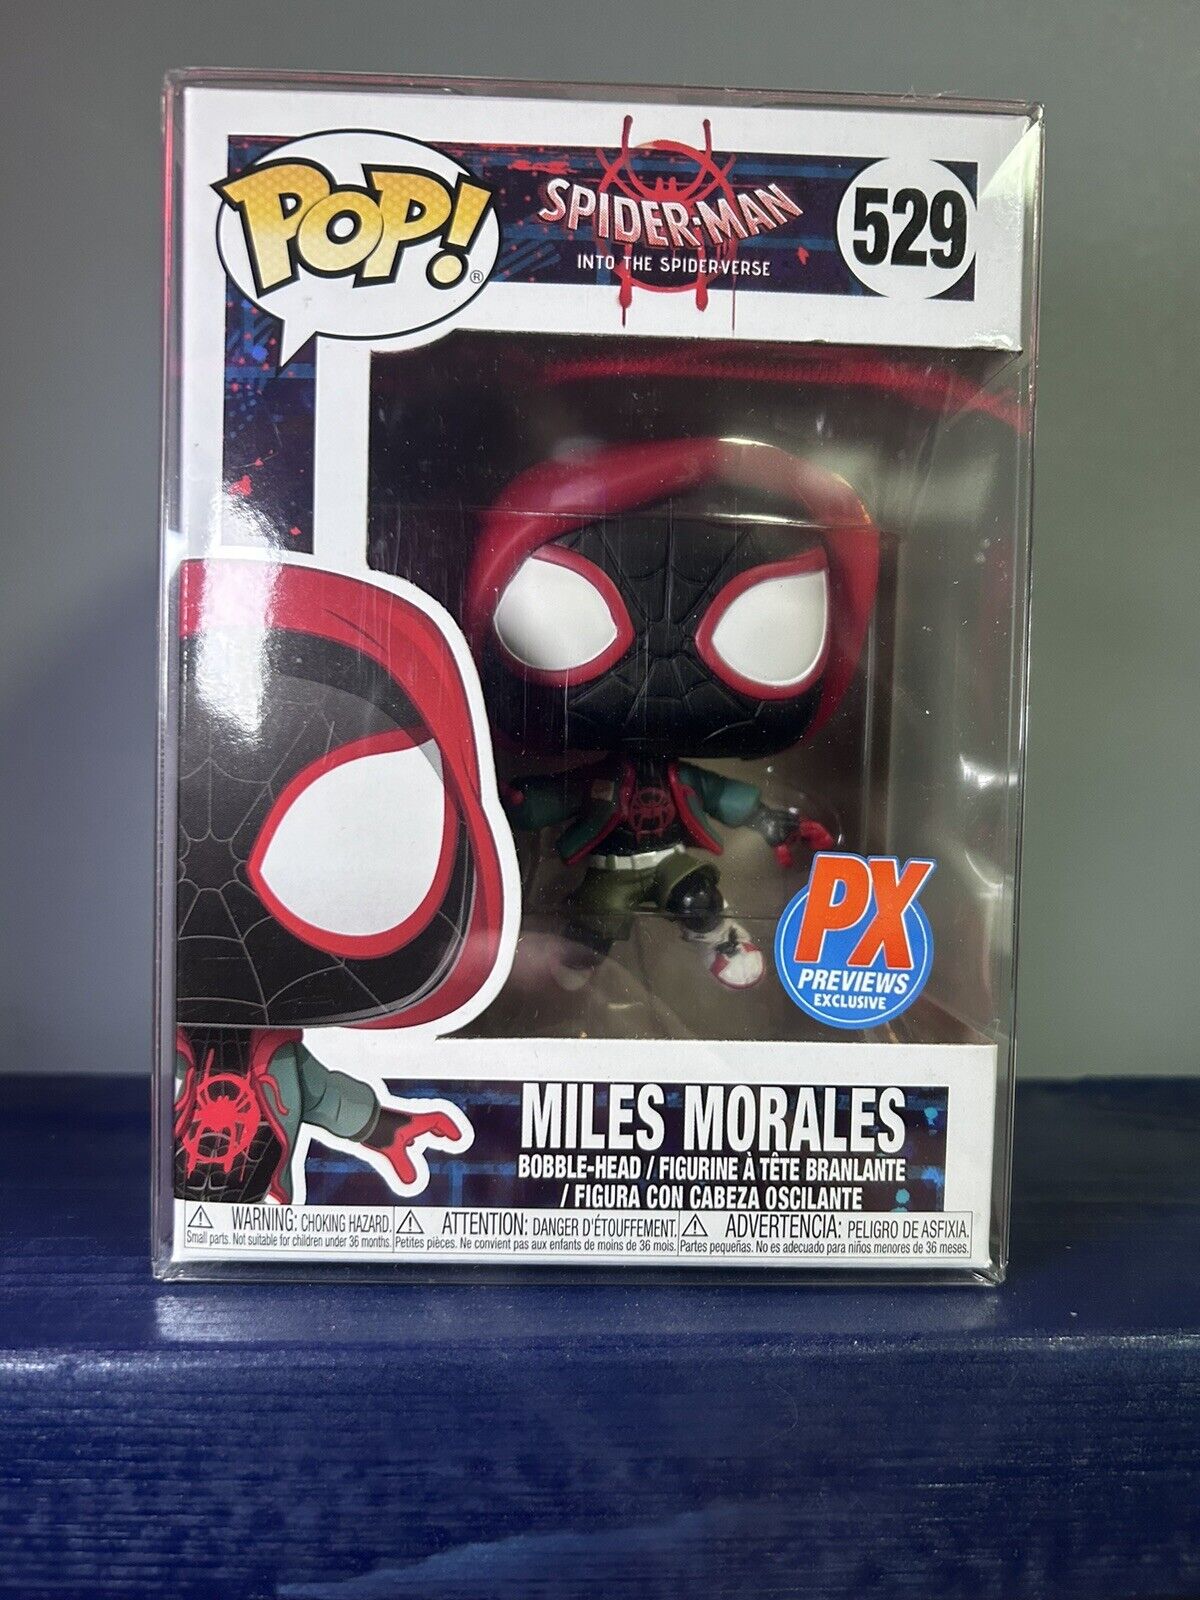 FUNKO POP VINYL MARVEL MILES MORALES PX PREVIEWS EXCLUSIVE #529 with Protector